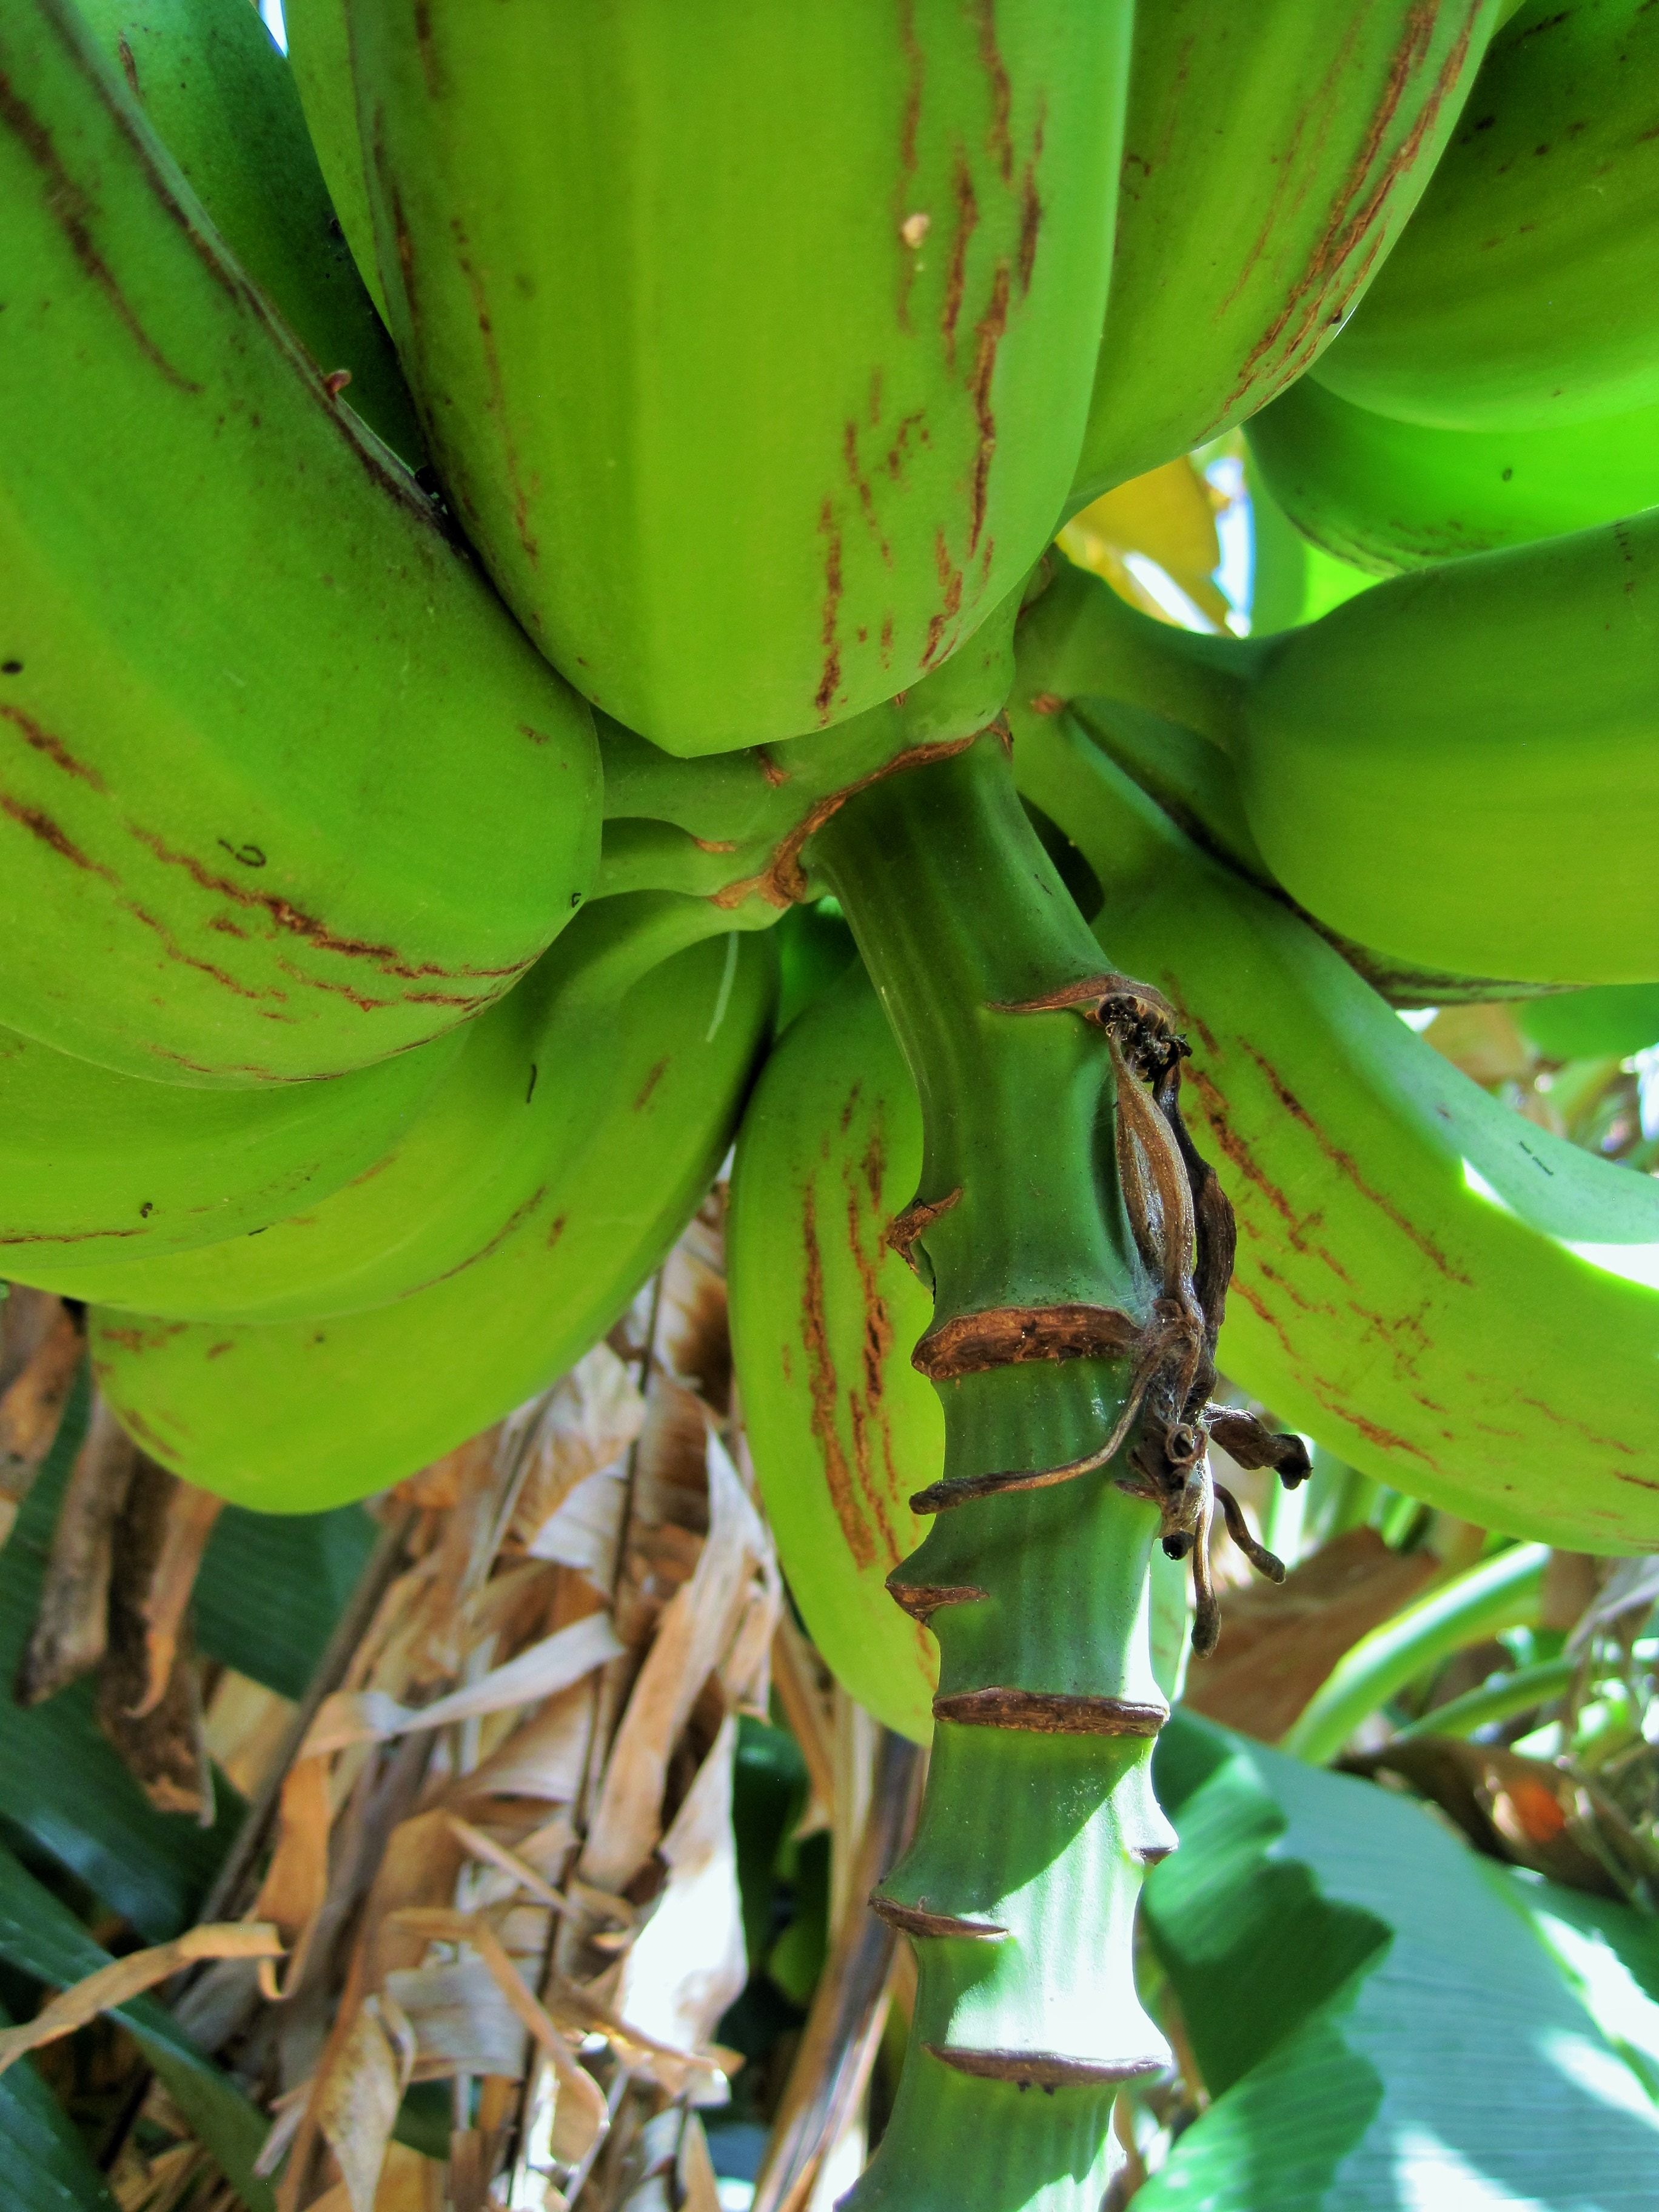 green unripe bananas on a sunny day